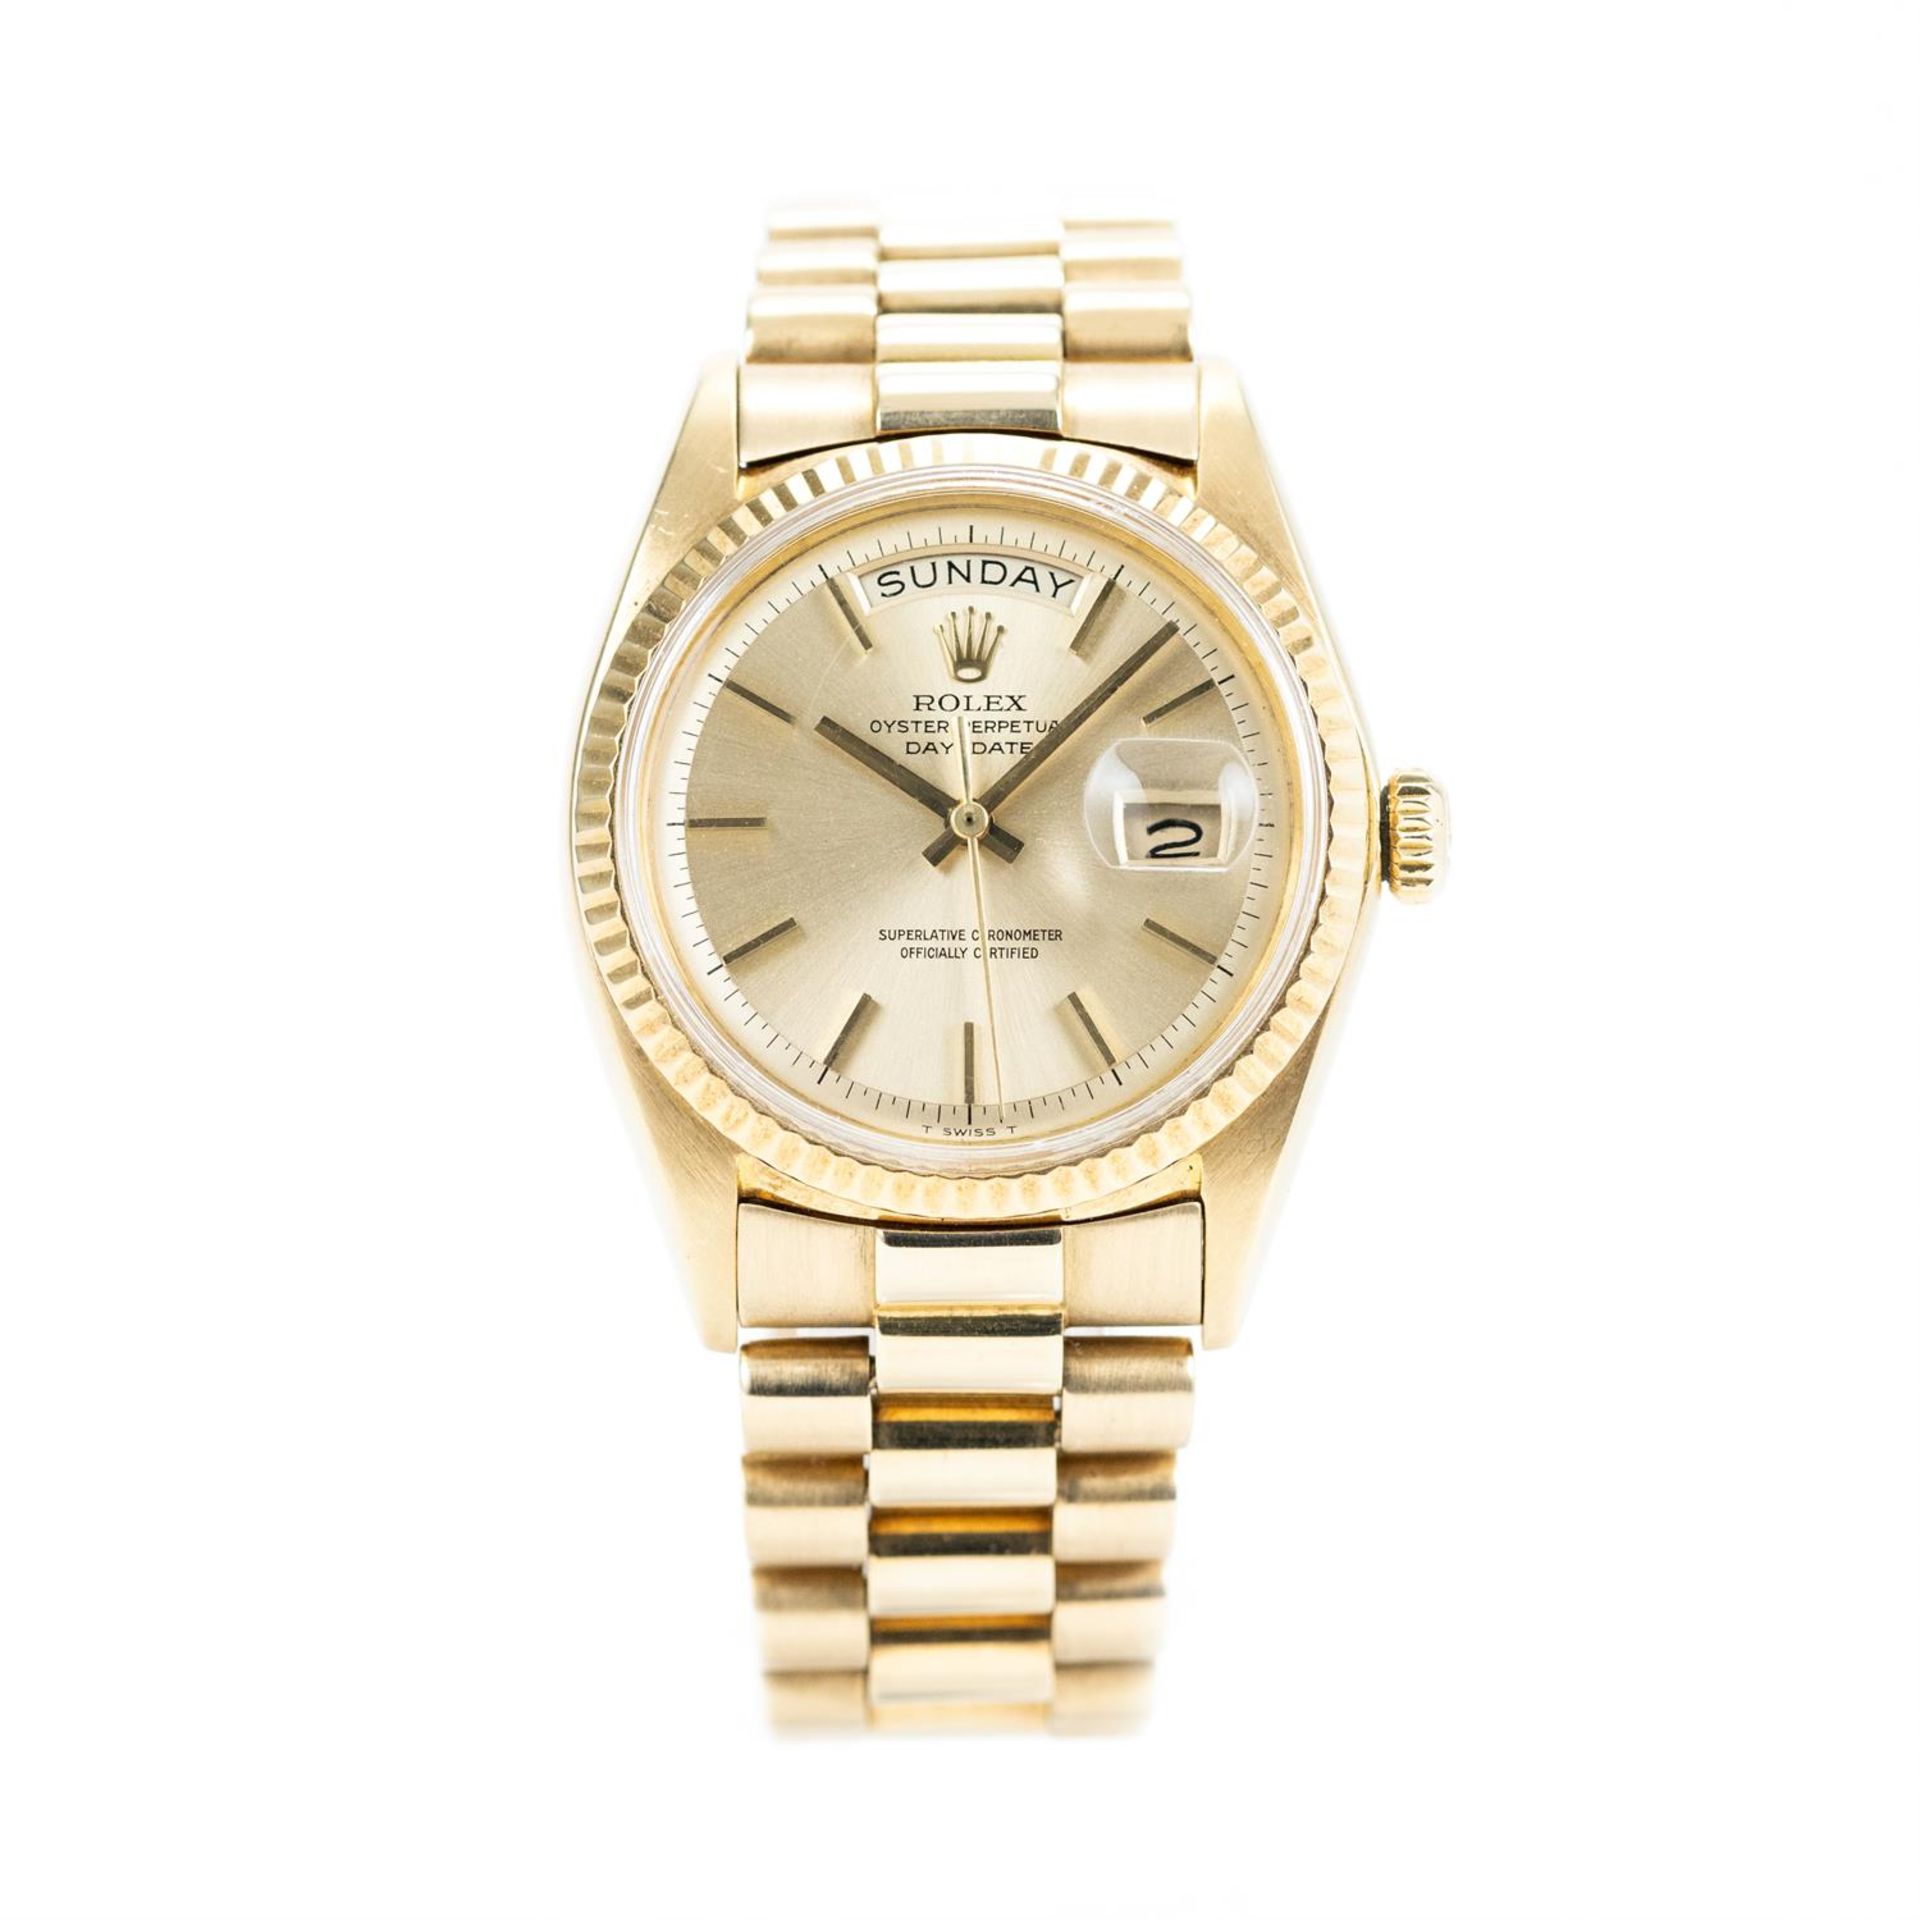 Rolex Day-Date 18ct Yellow Gold - Image 2 of 4